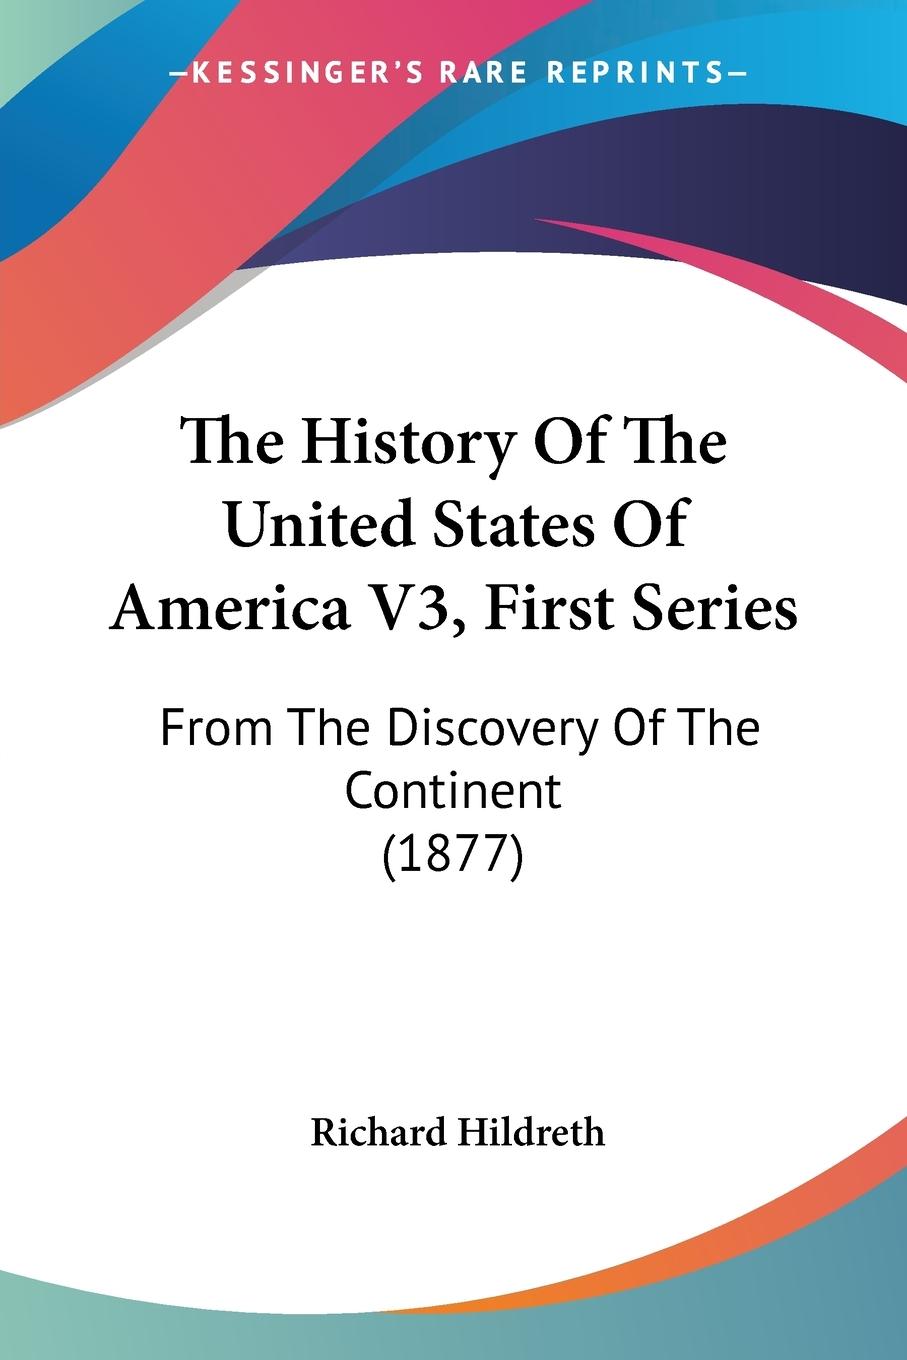 The History Of The United States Of America V3, First Series - Hildreth, Richard